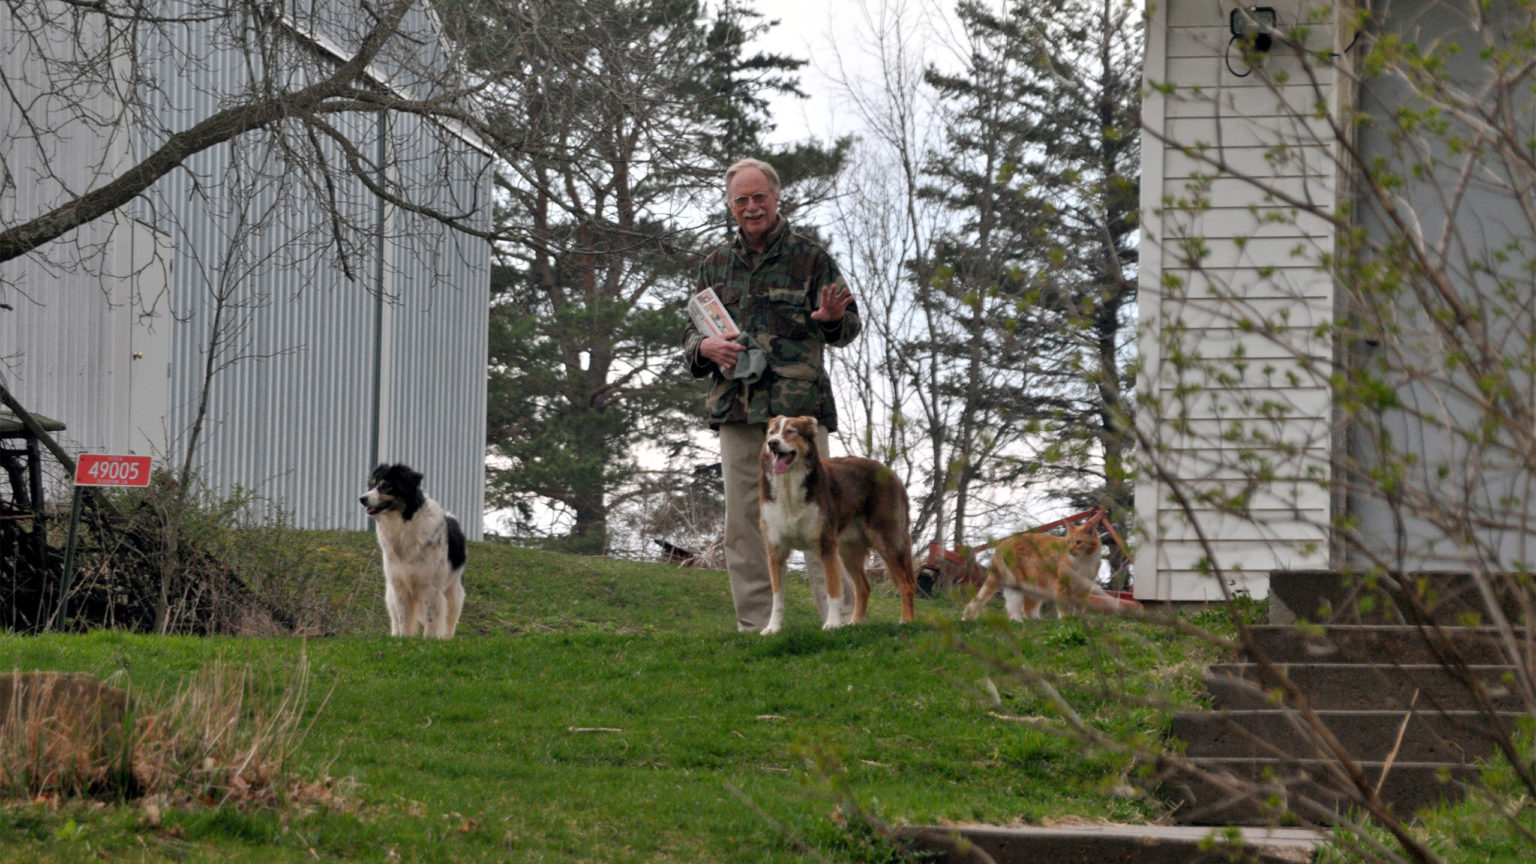 Man standing outside with 3 dogs